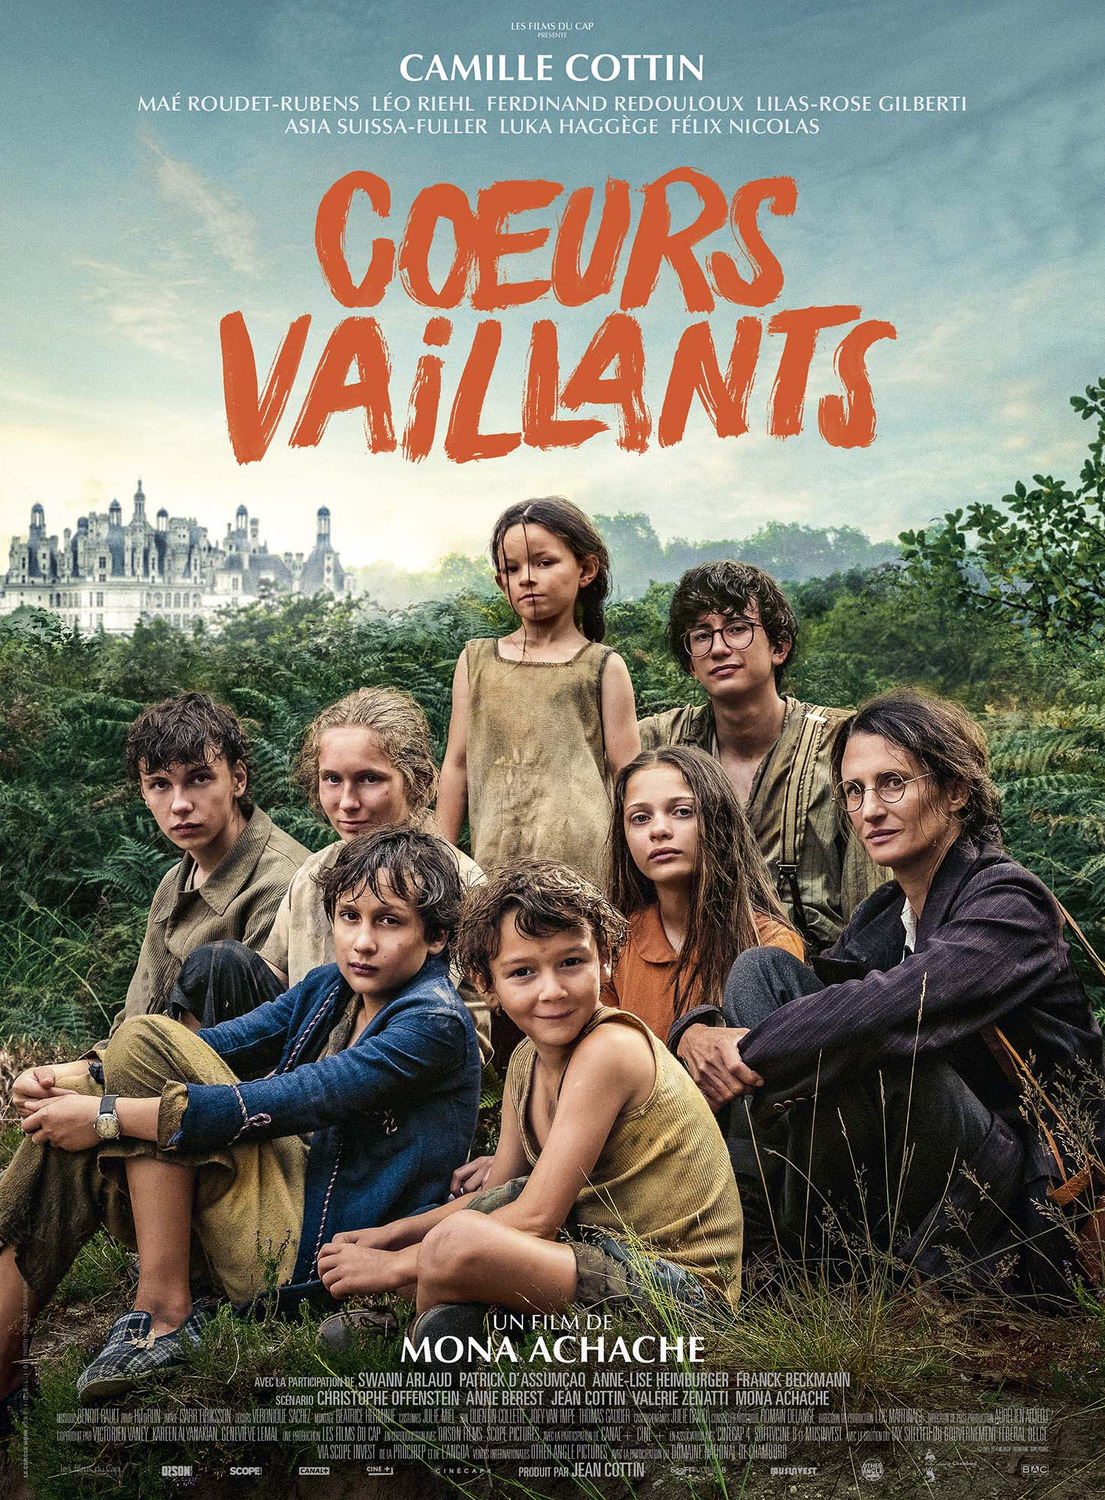 Extra Large Movie Poster Image for Coeurs vaillants 